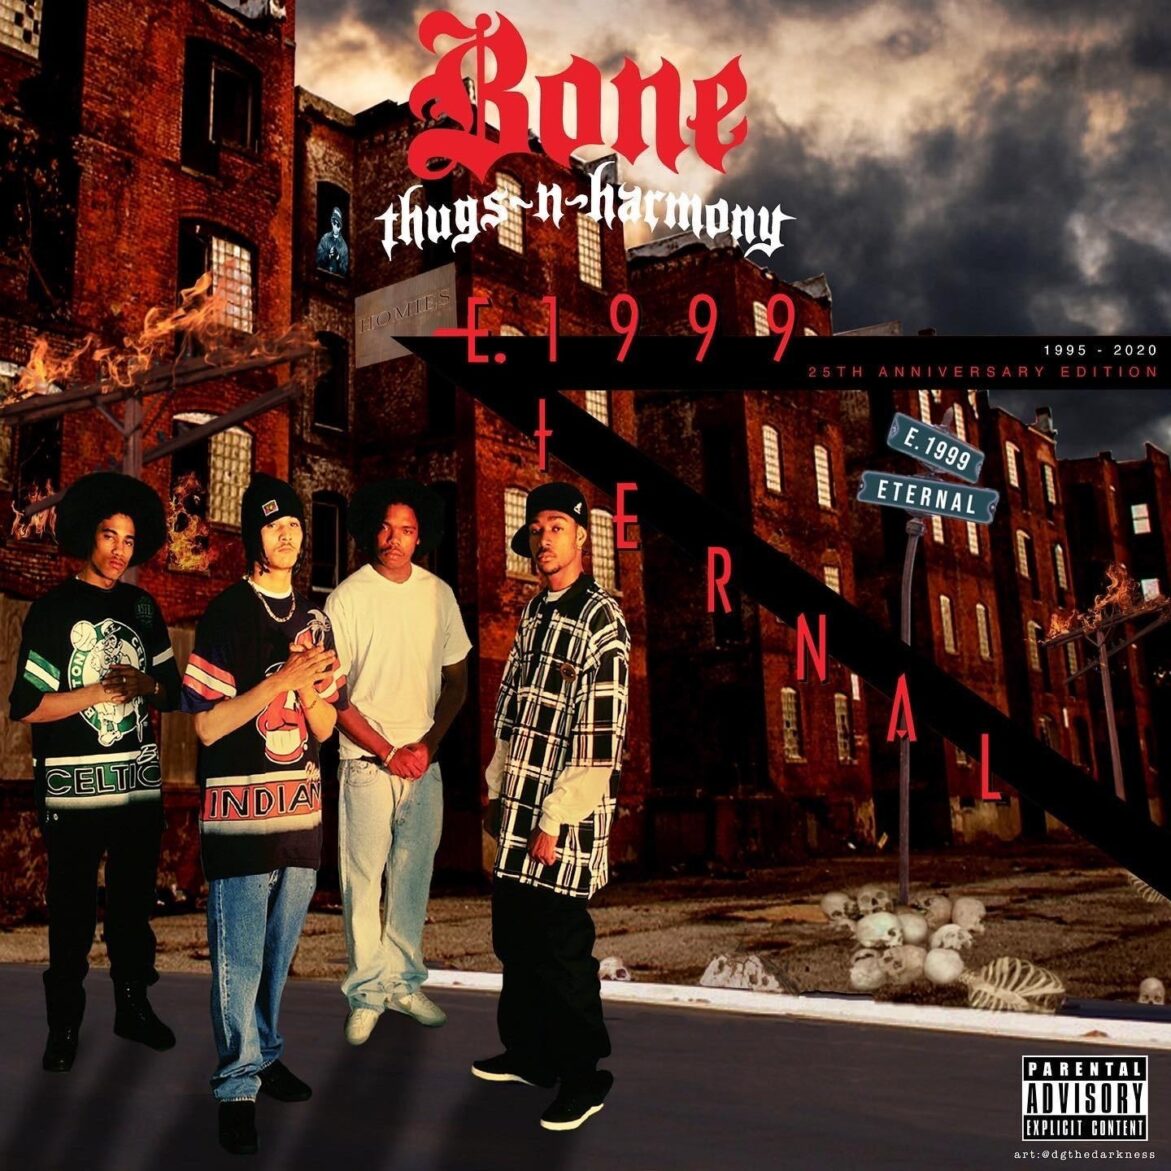 Black Podcasting - Bone Thugs-N-Harmony: E. 1999 Eternal (1995). A View of Rap At the Crossroads